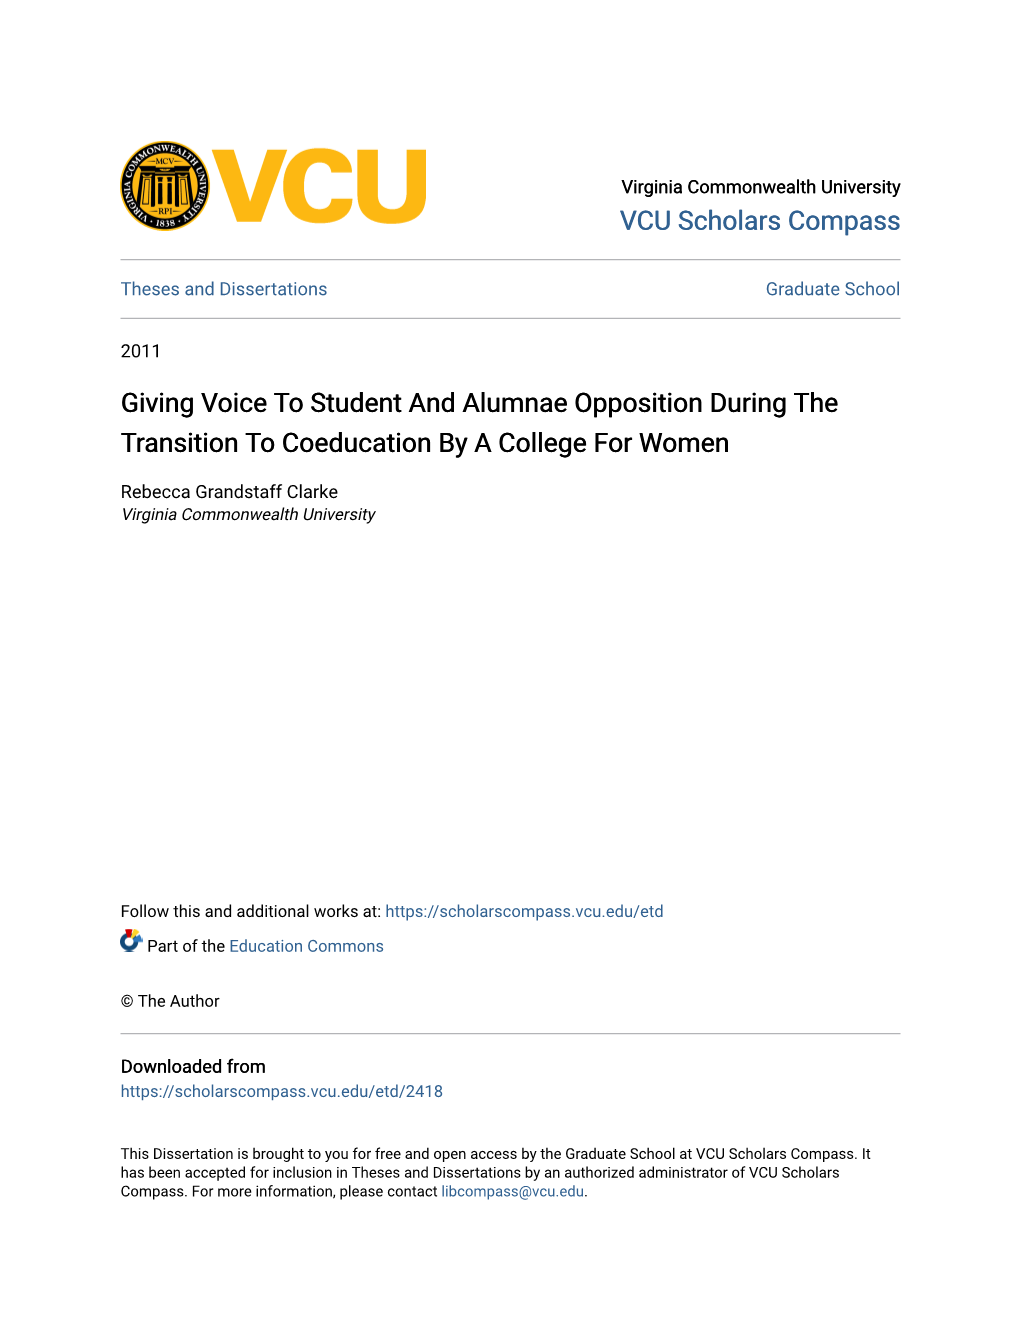 Giving Voice to Student and Alumnae Opposition During the Transition to Coeducation by a College for Women